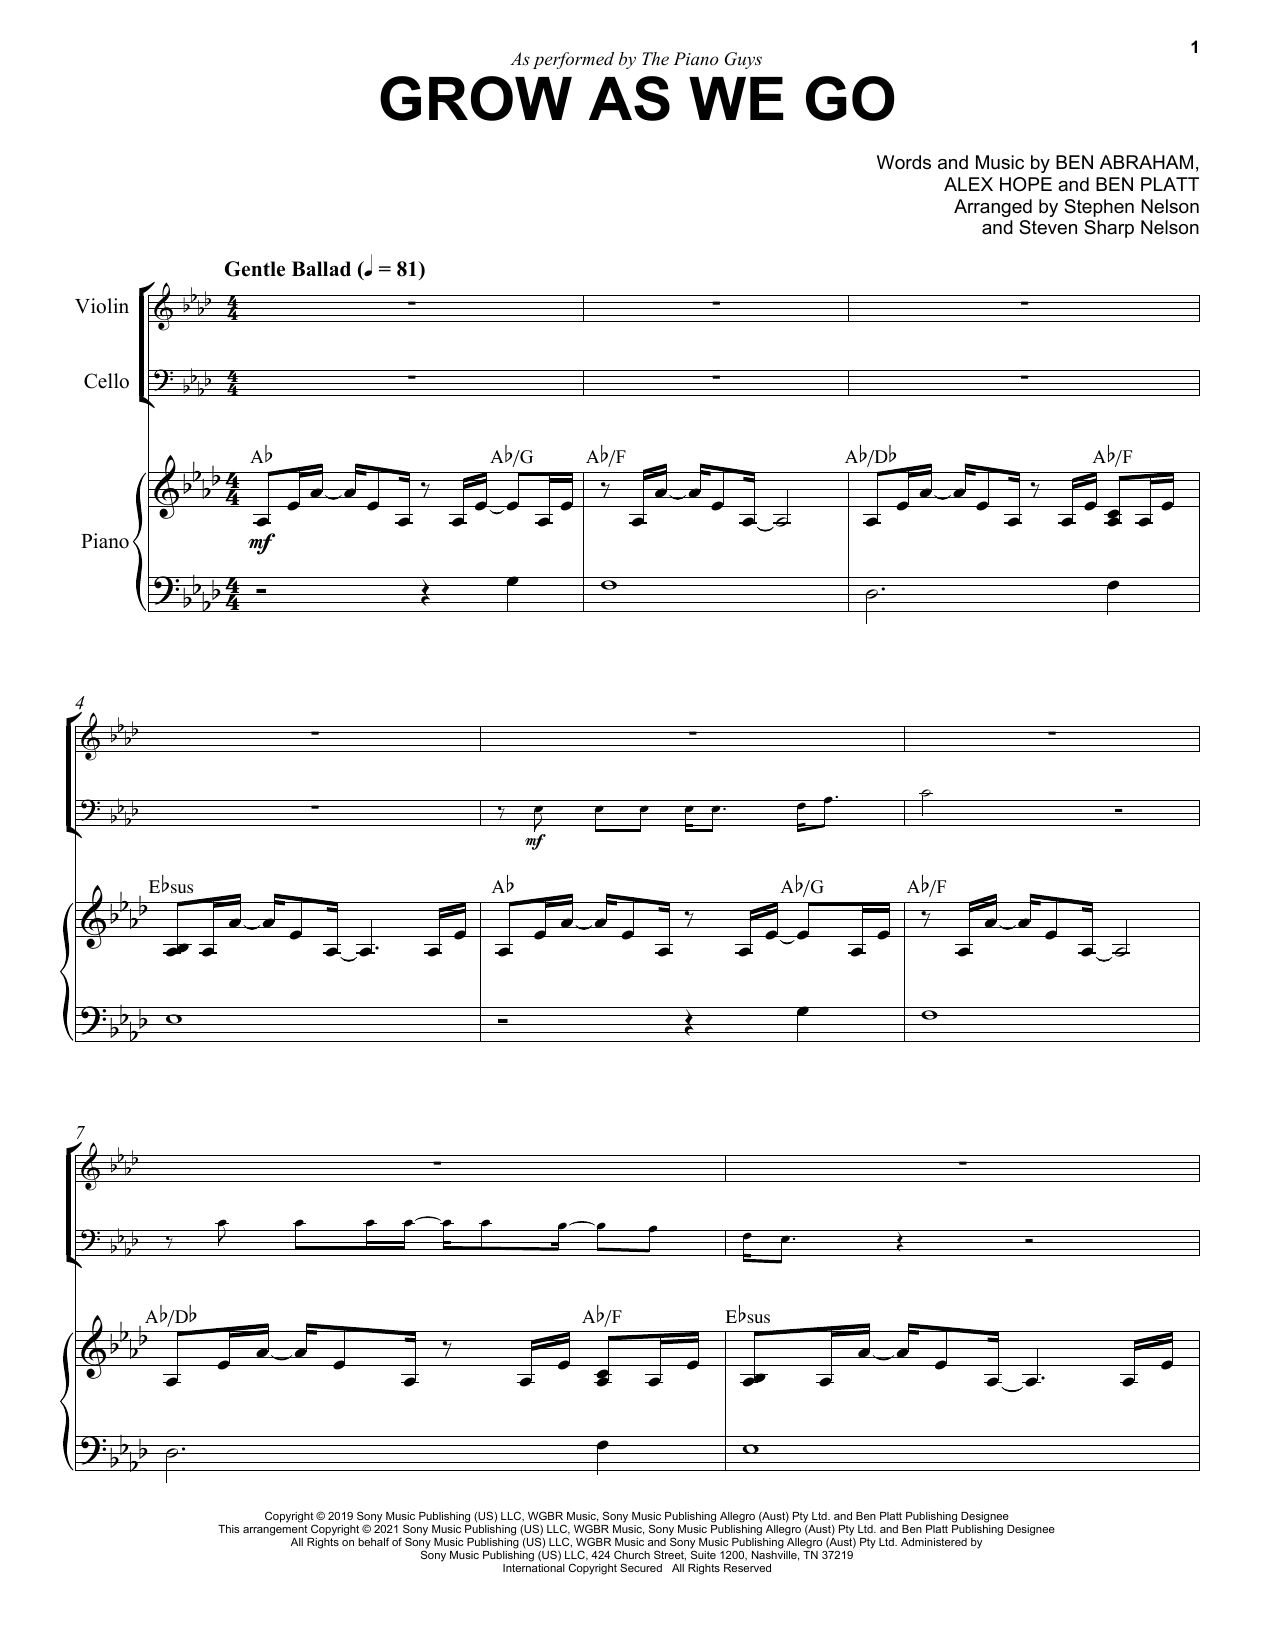 Download The Piano Guys Grow As We Go Sheet Music